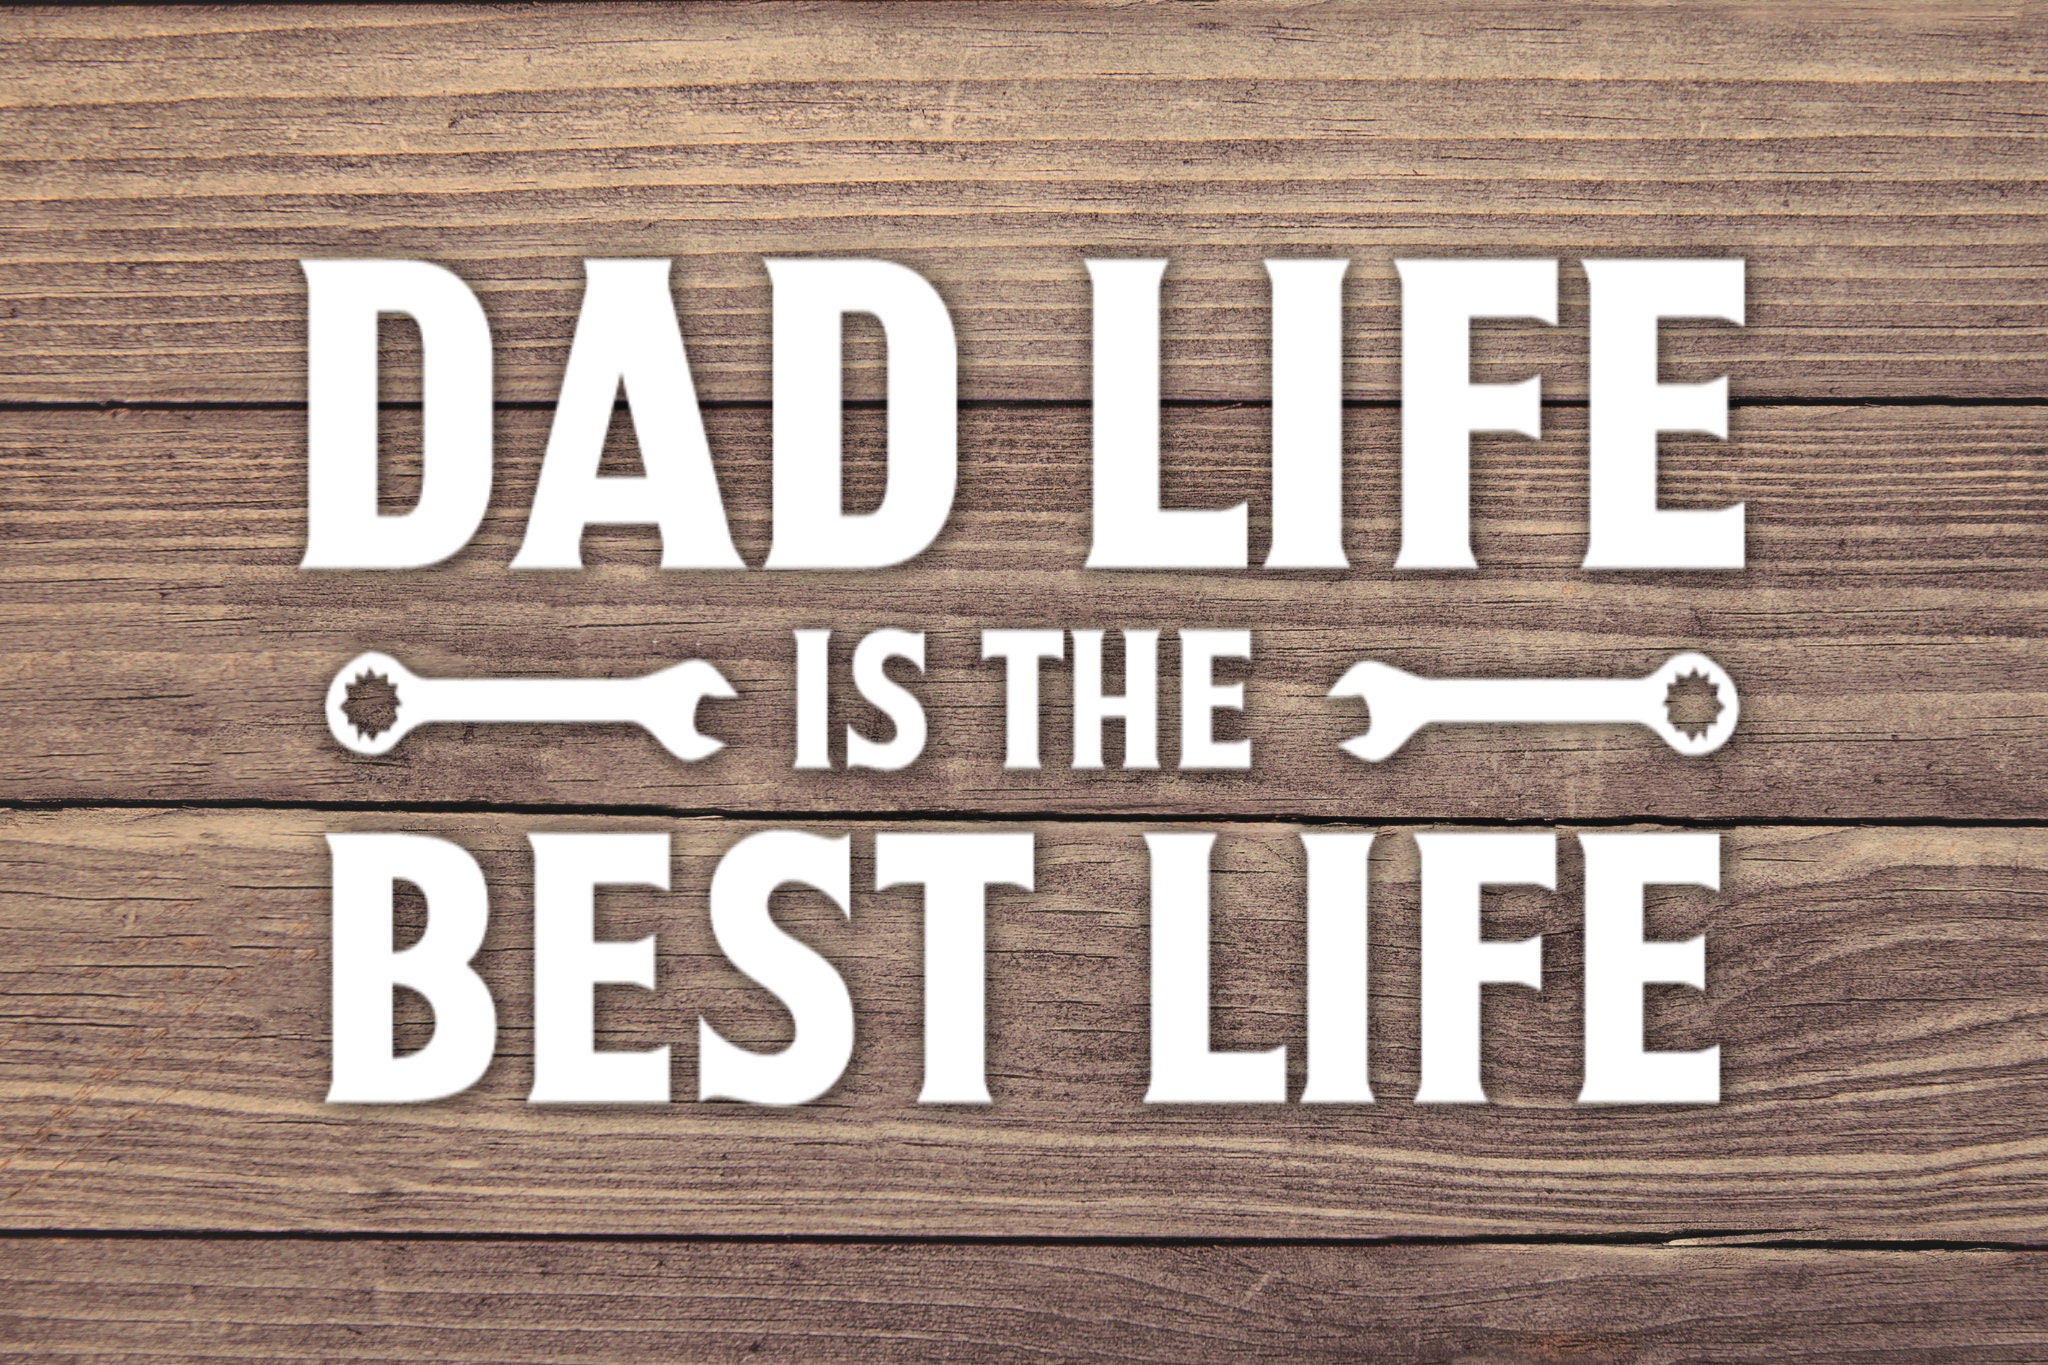 Best Dad Ever Car Accessory, Gift for Dad, Car Accessories for Men, Father  Day Gift 